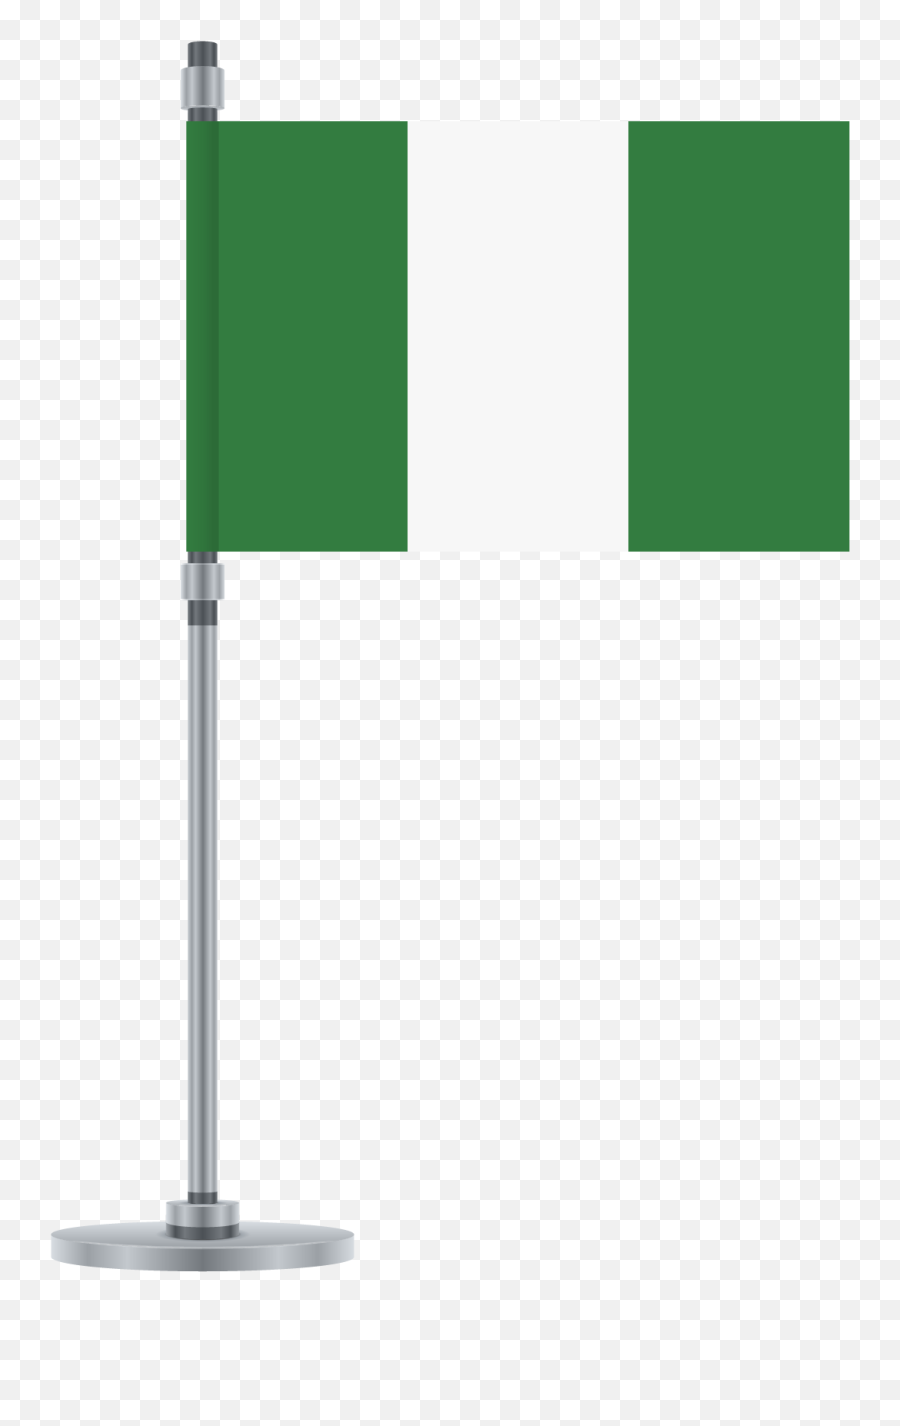 Send A Parcel To Nigeria Delivery - Nigeria Flag With Pole Png,Nigerian Flag Png